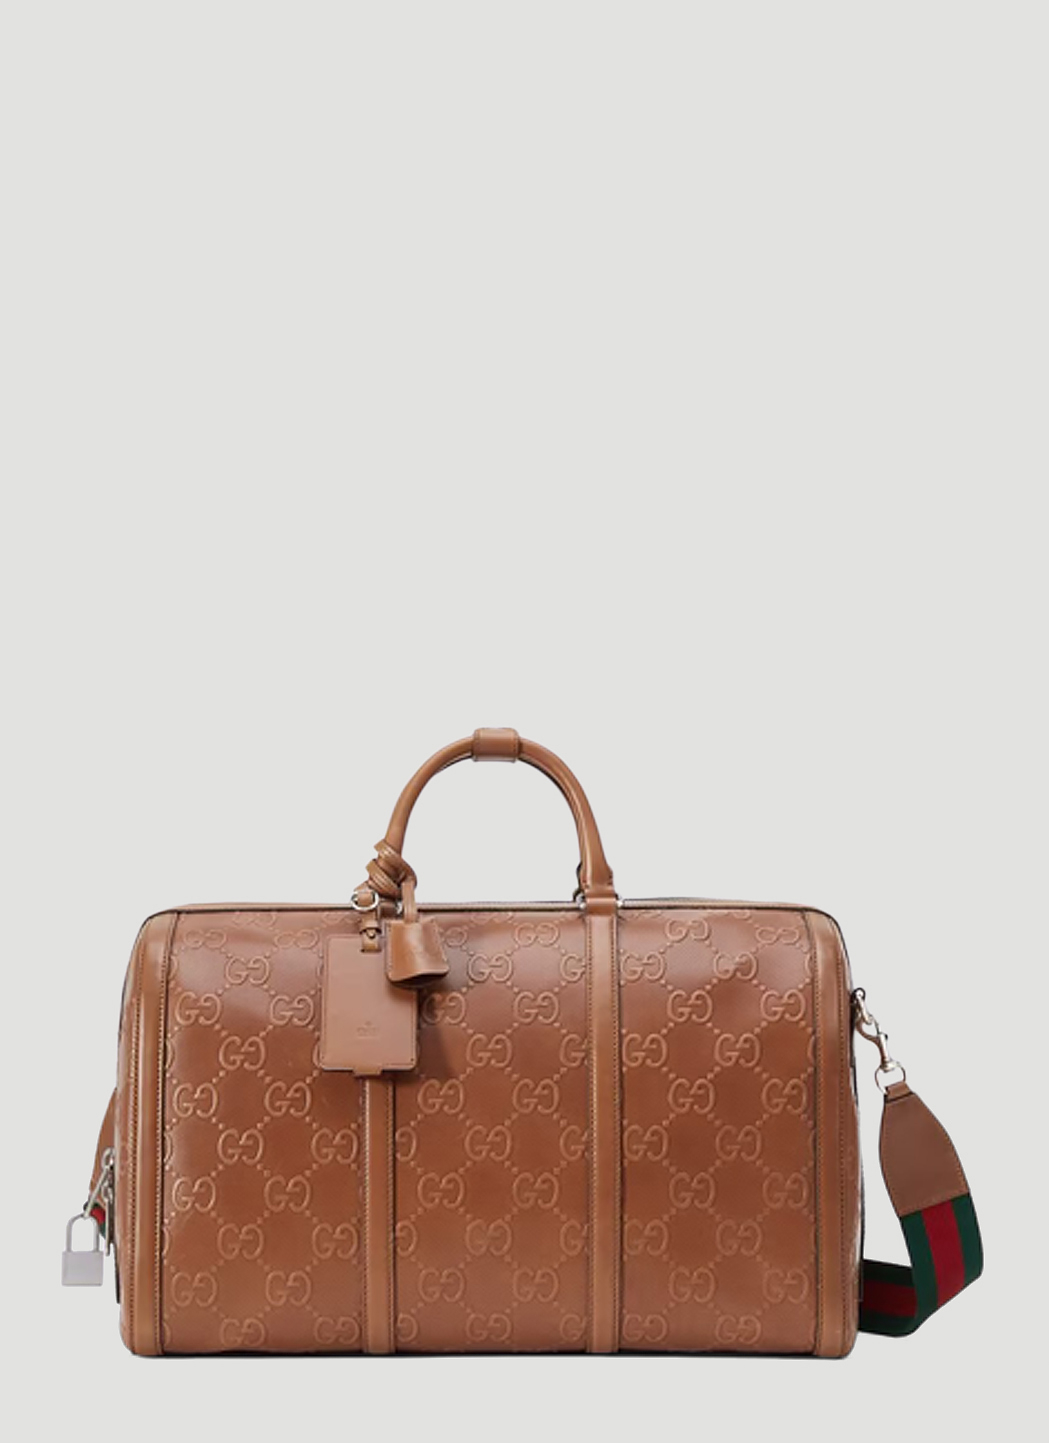 GUCCI GG Embossed Duffle Bag Brown Leather Travel Carry-On Guccissima  Weekender